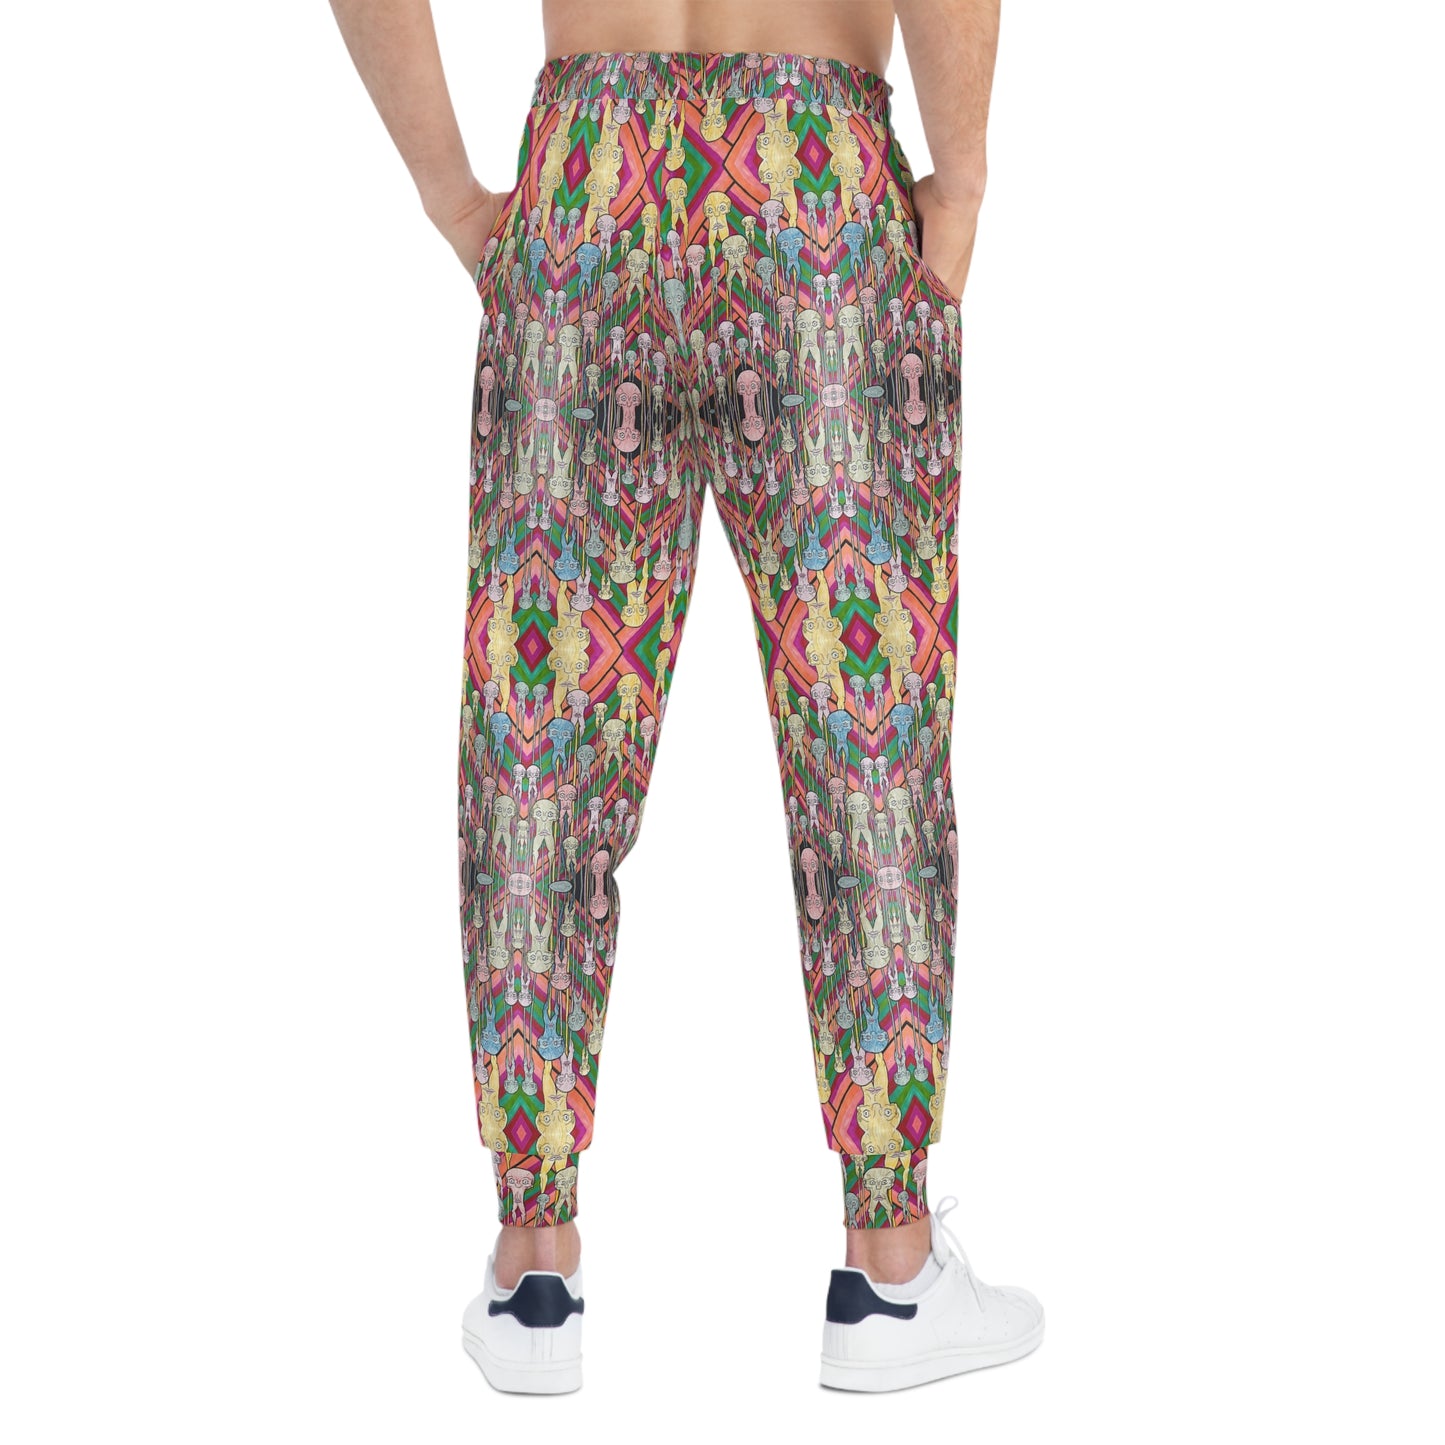 "Too Many Faces" Athletic Joggers